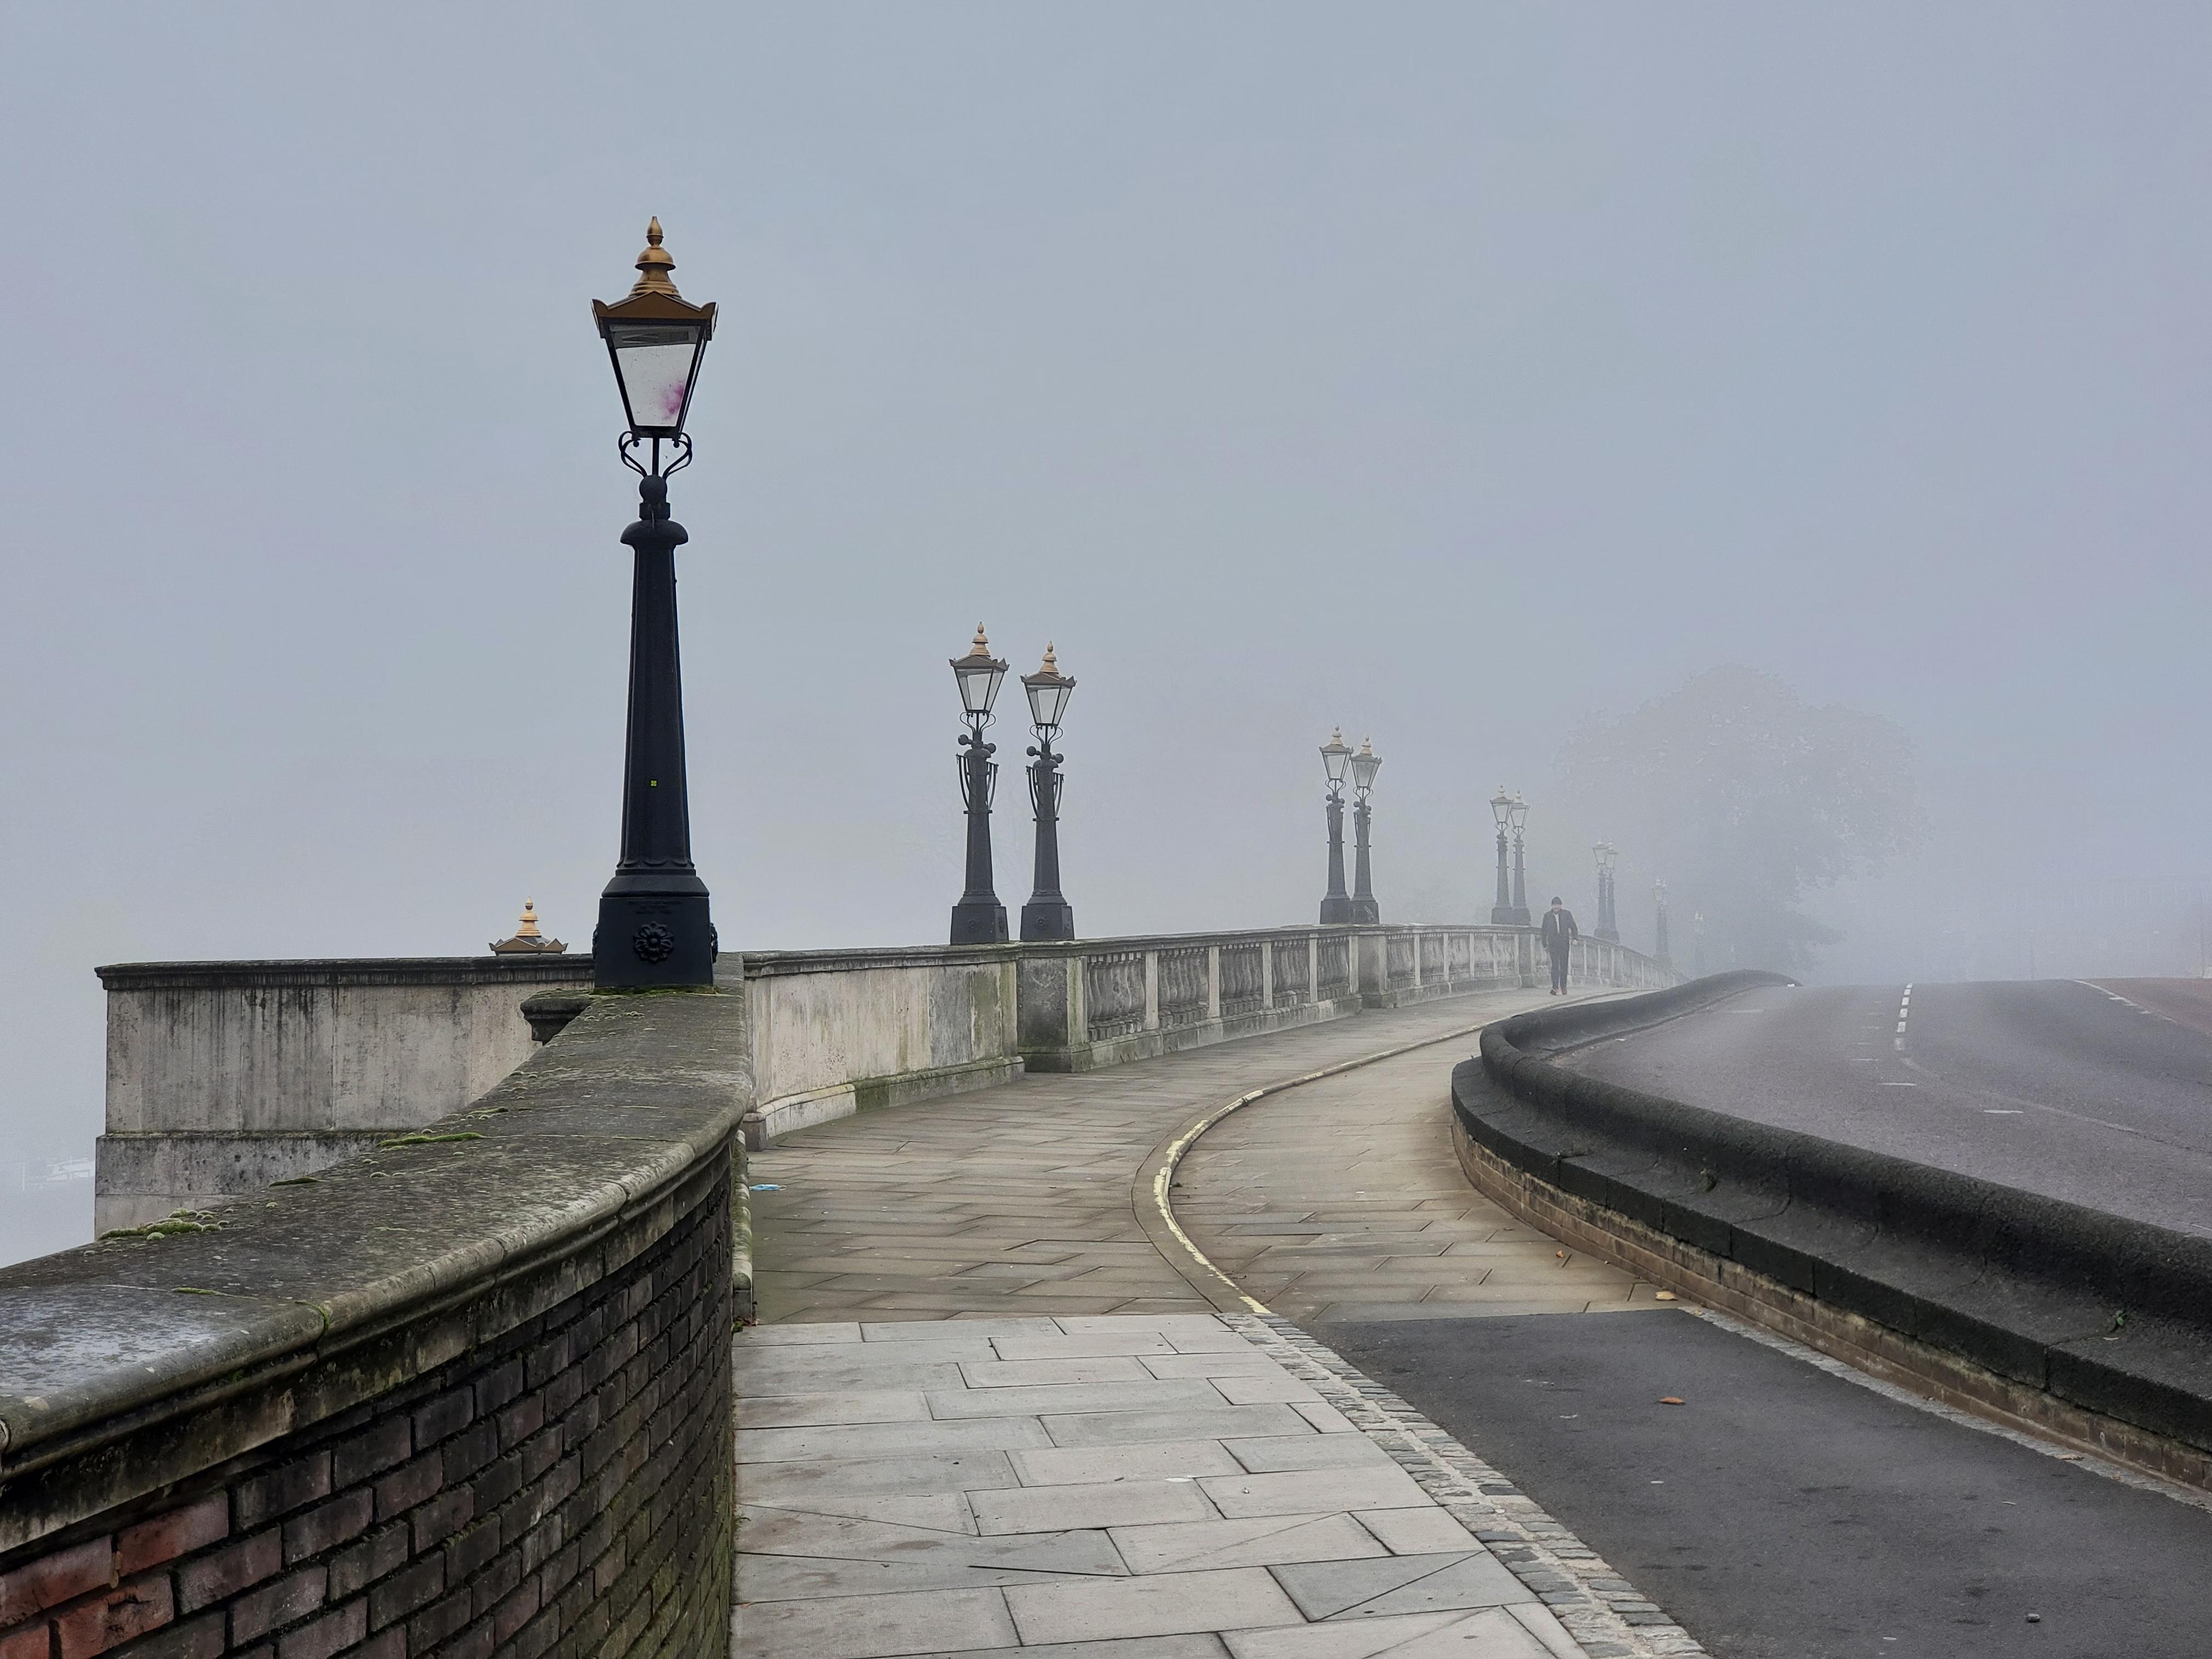 The early morning view over Kingston Bridge from the direction of Market place. The bridge is empty and covered in a thick, grey fog.